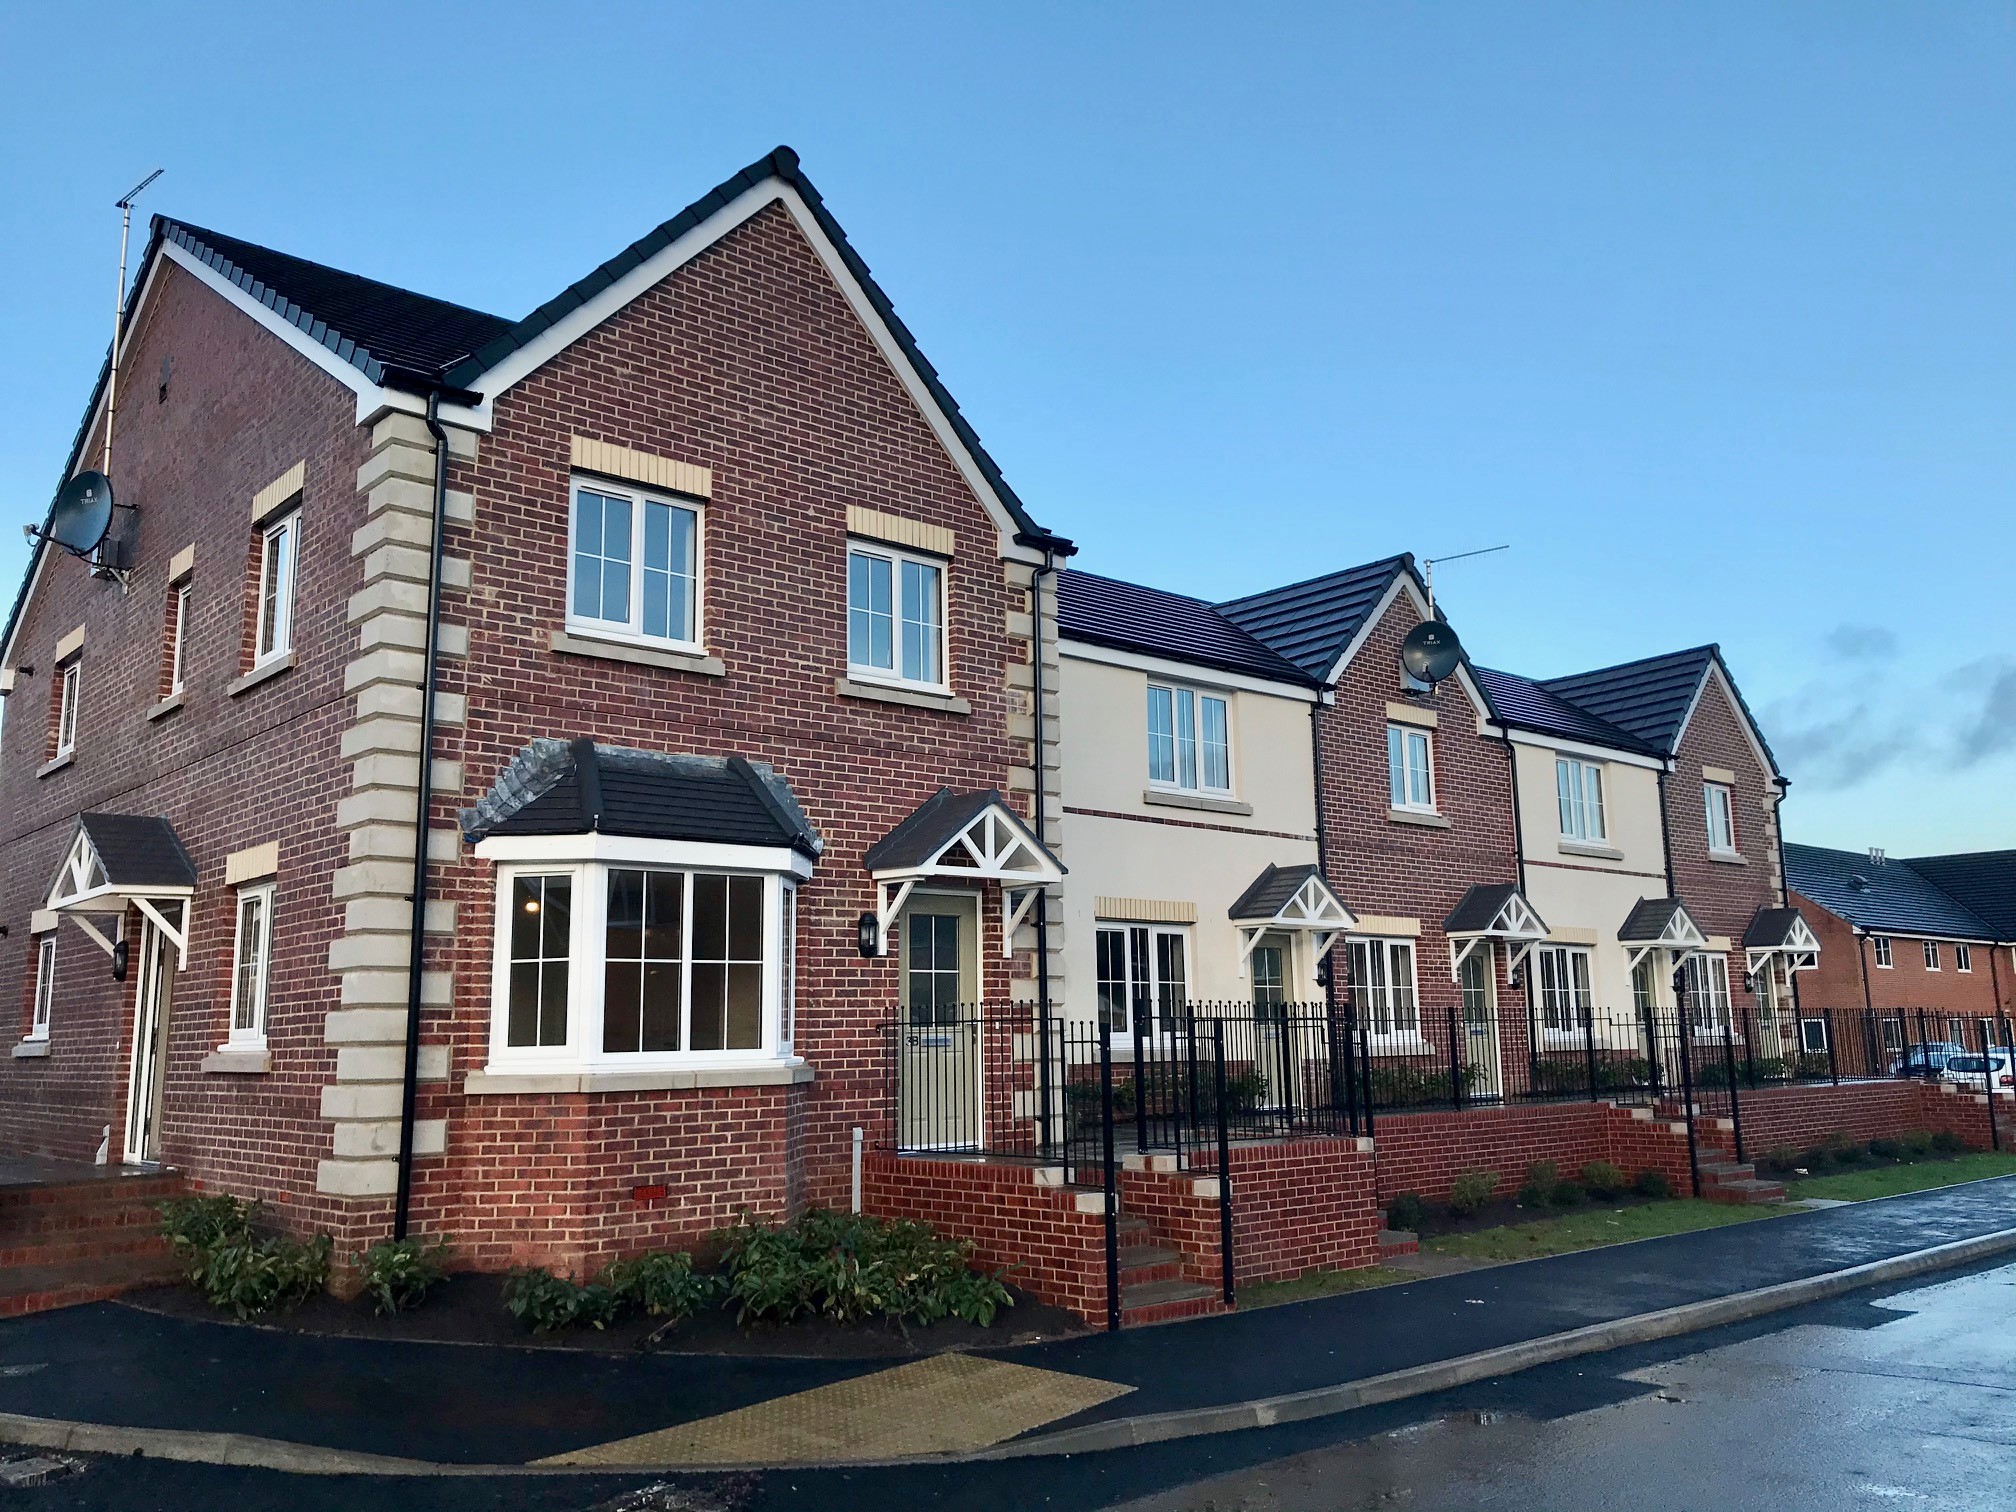 11 new homes at Caerphilly Glade development